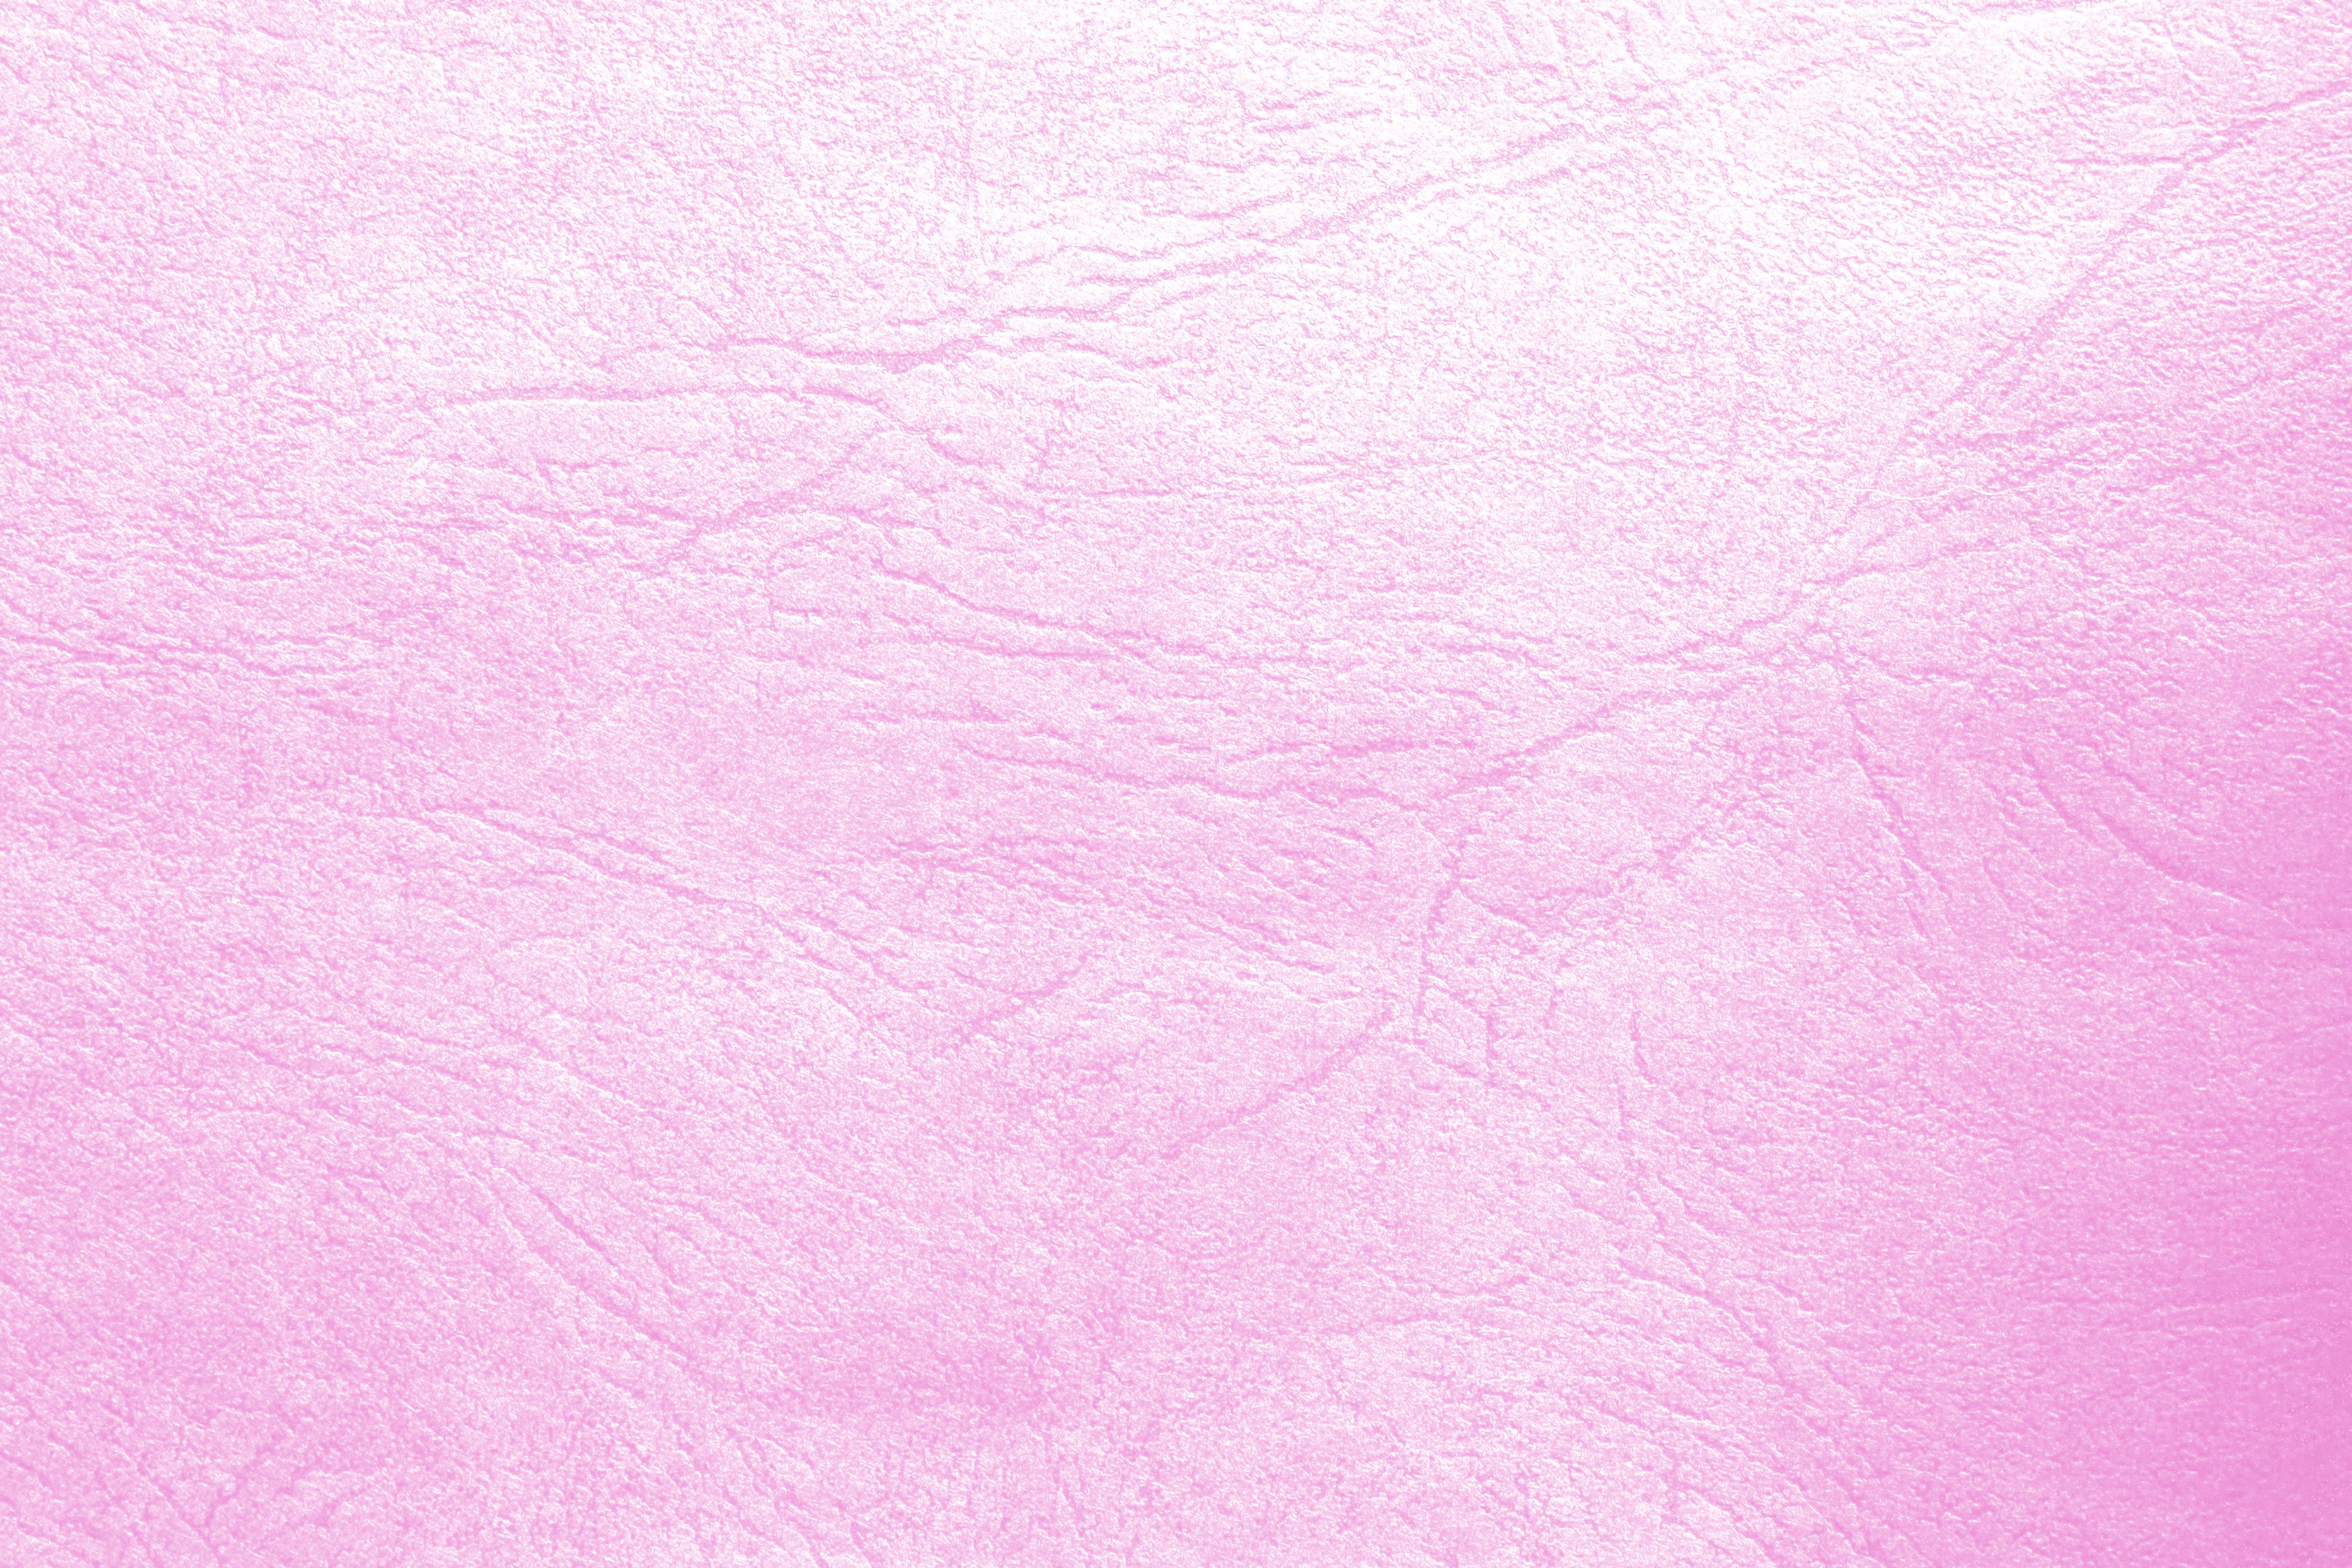 Pink Leather Texture High Resolution Photo Dimensions